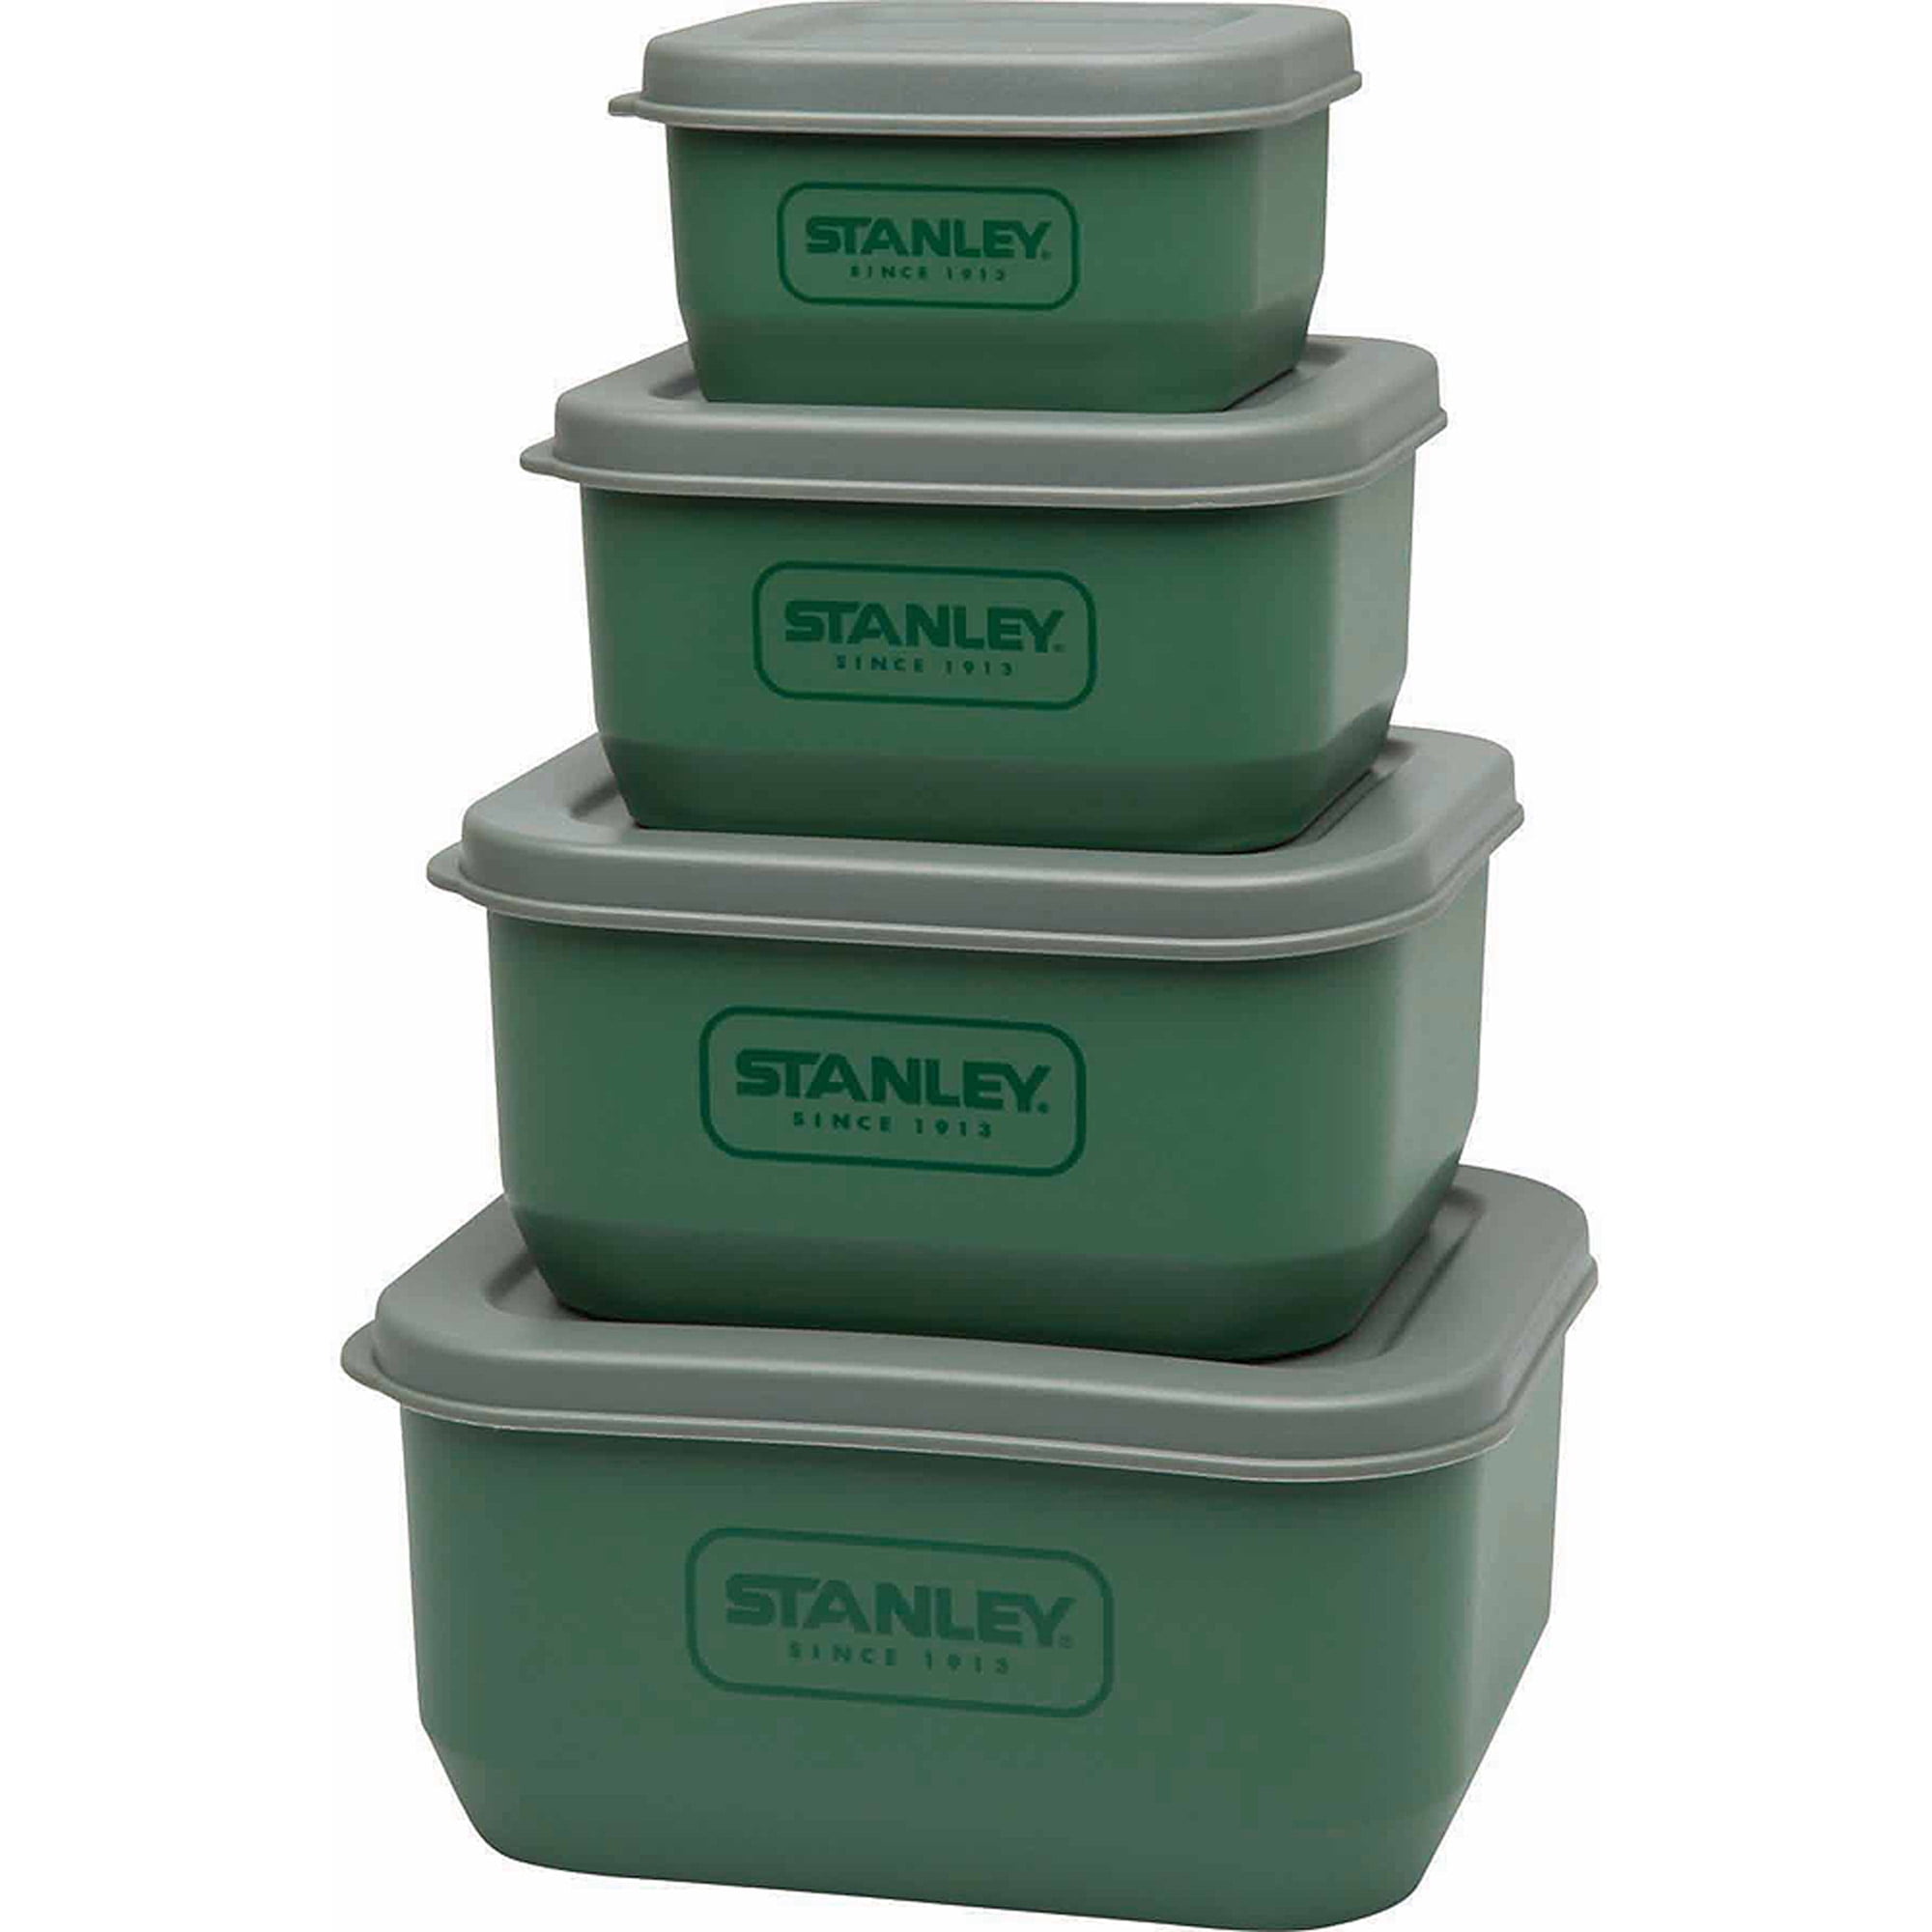 Stanley Adventure eCycle Nesting Food Containers Green